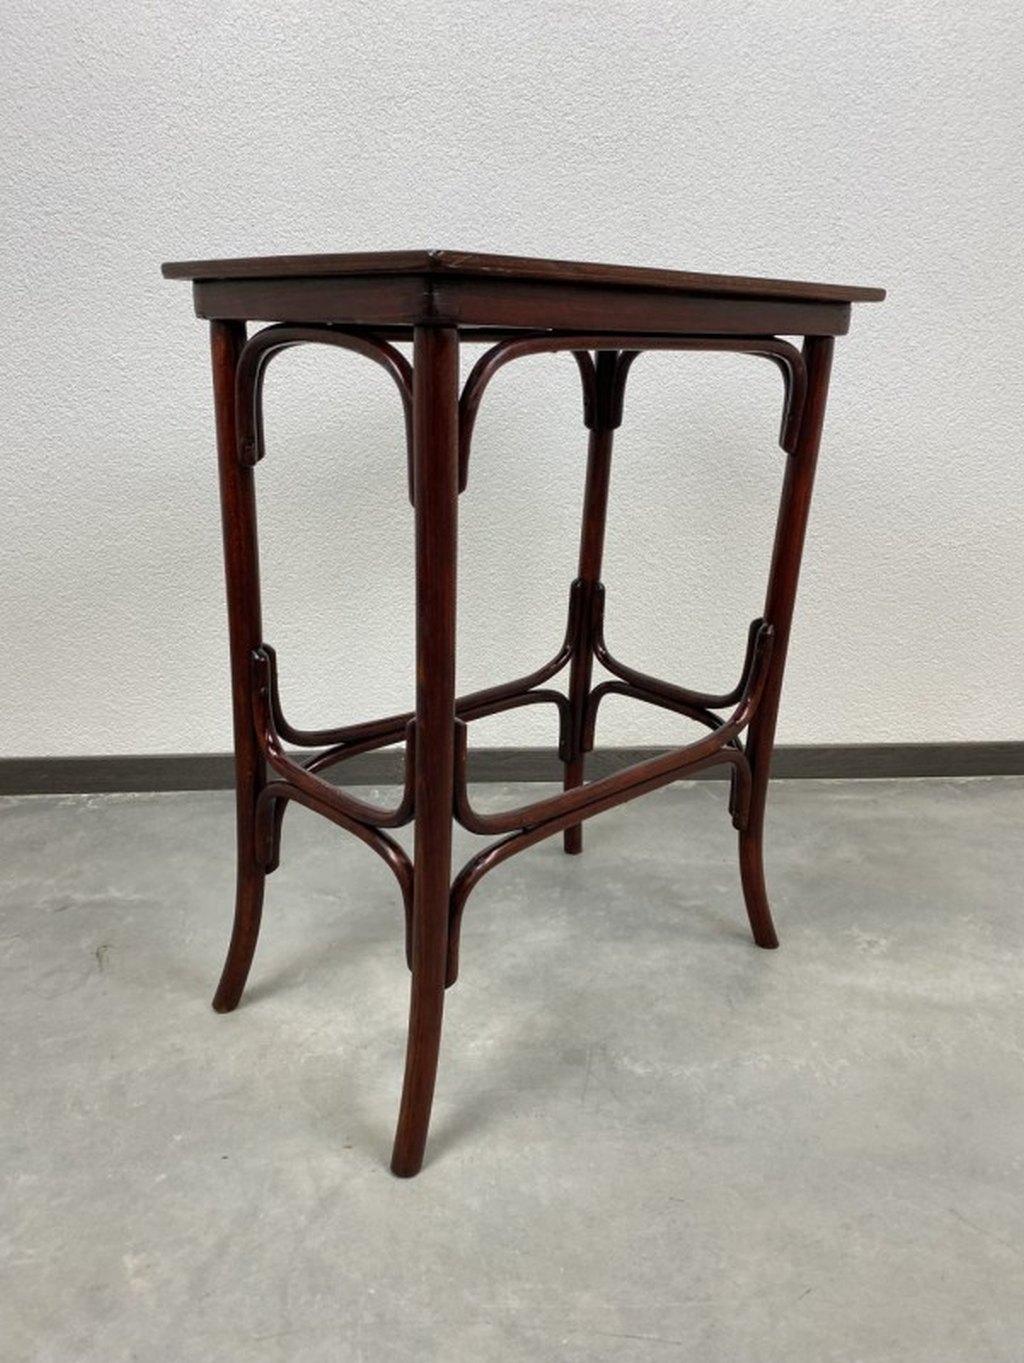 Thonet side table no.12. Professionally stained and repolished.